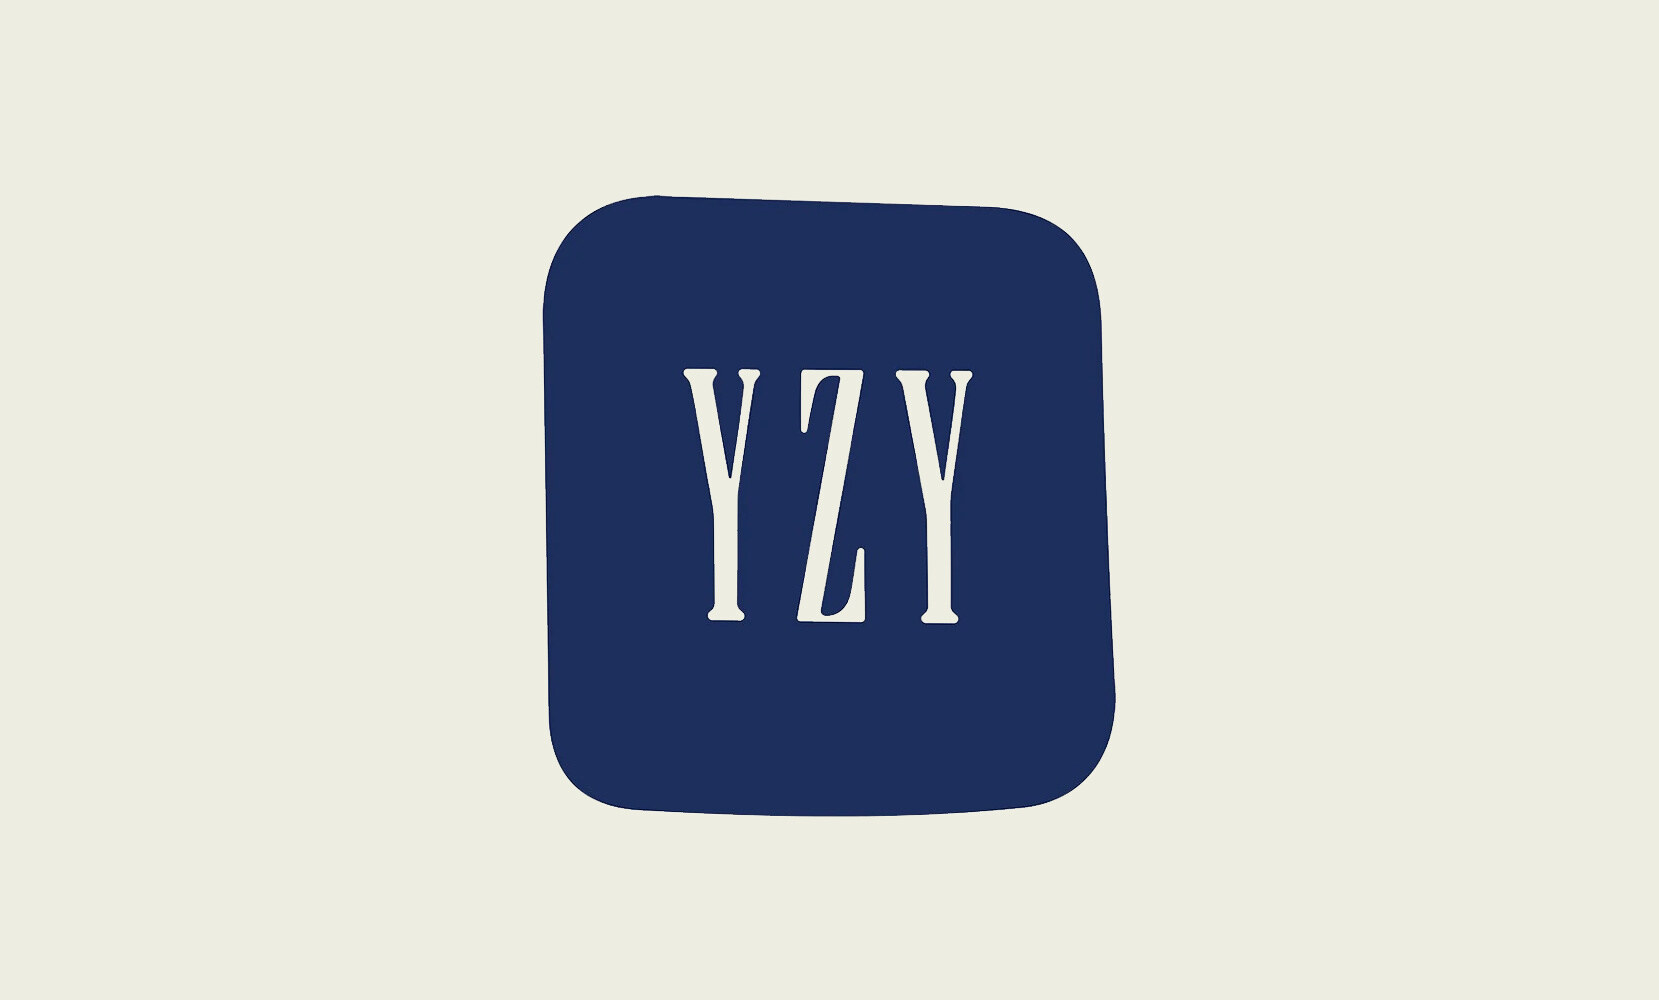 YZY official logo